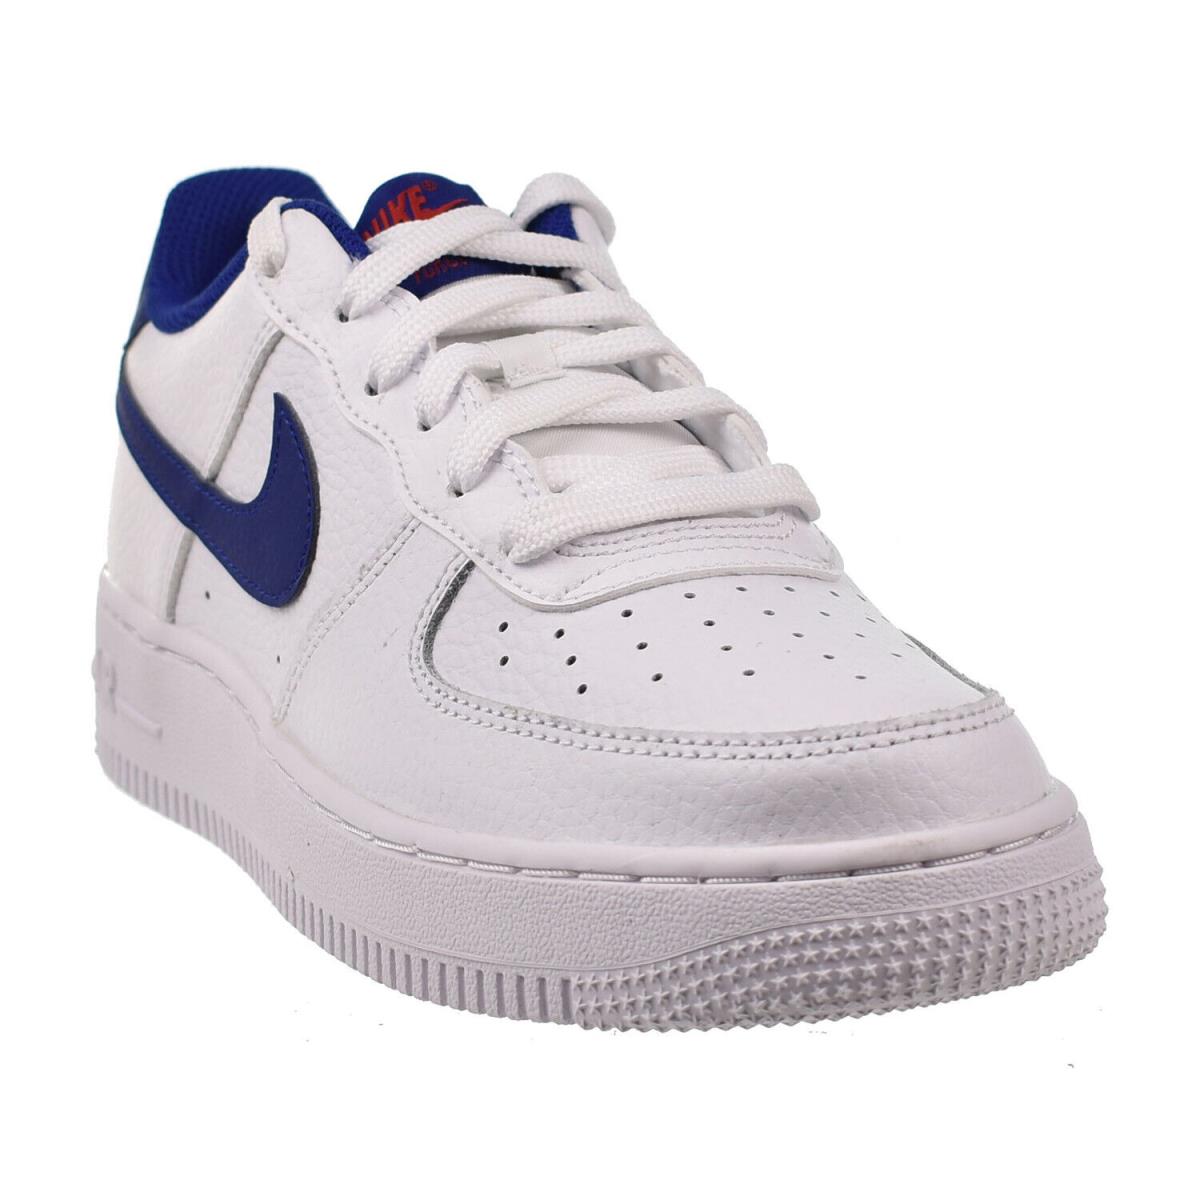 Nike Air Force 1 Low GS Big Kids` Shoes White-deep Royal Blue CT3839-101 - White-Deep Royal Blue